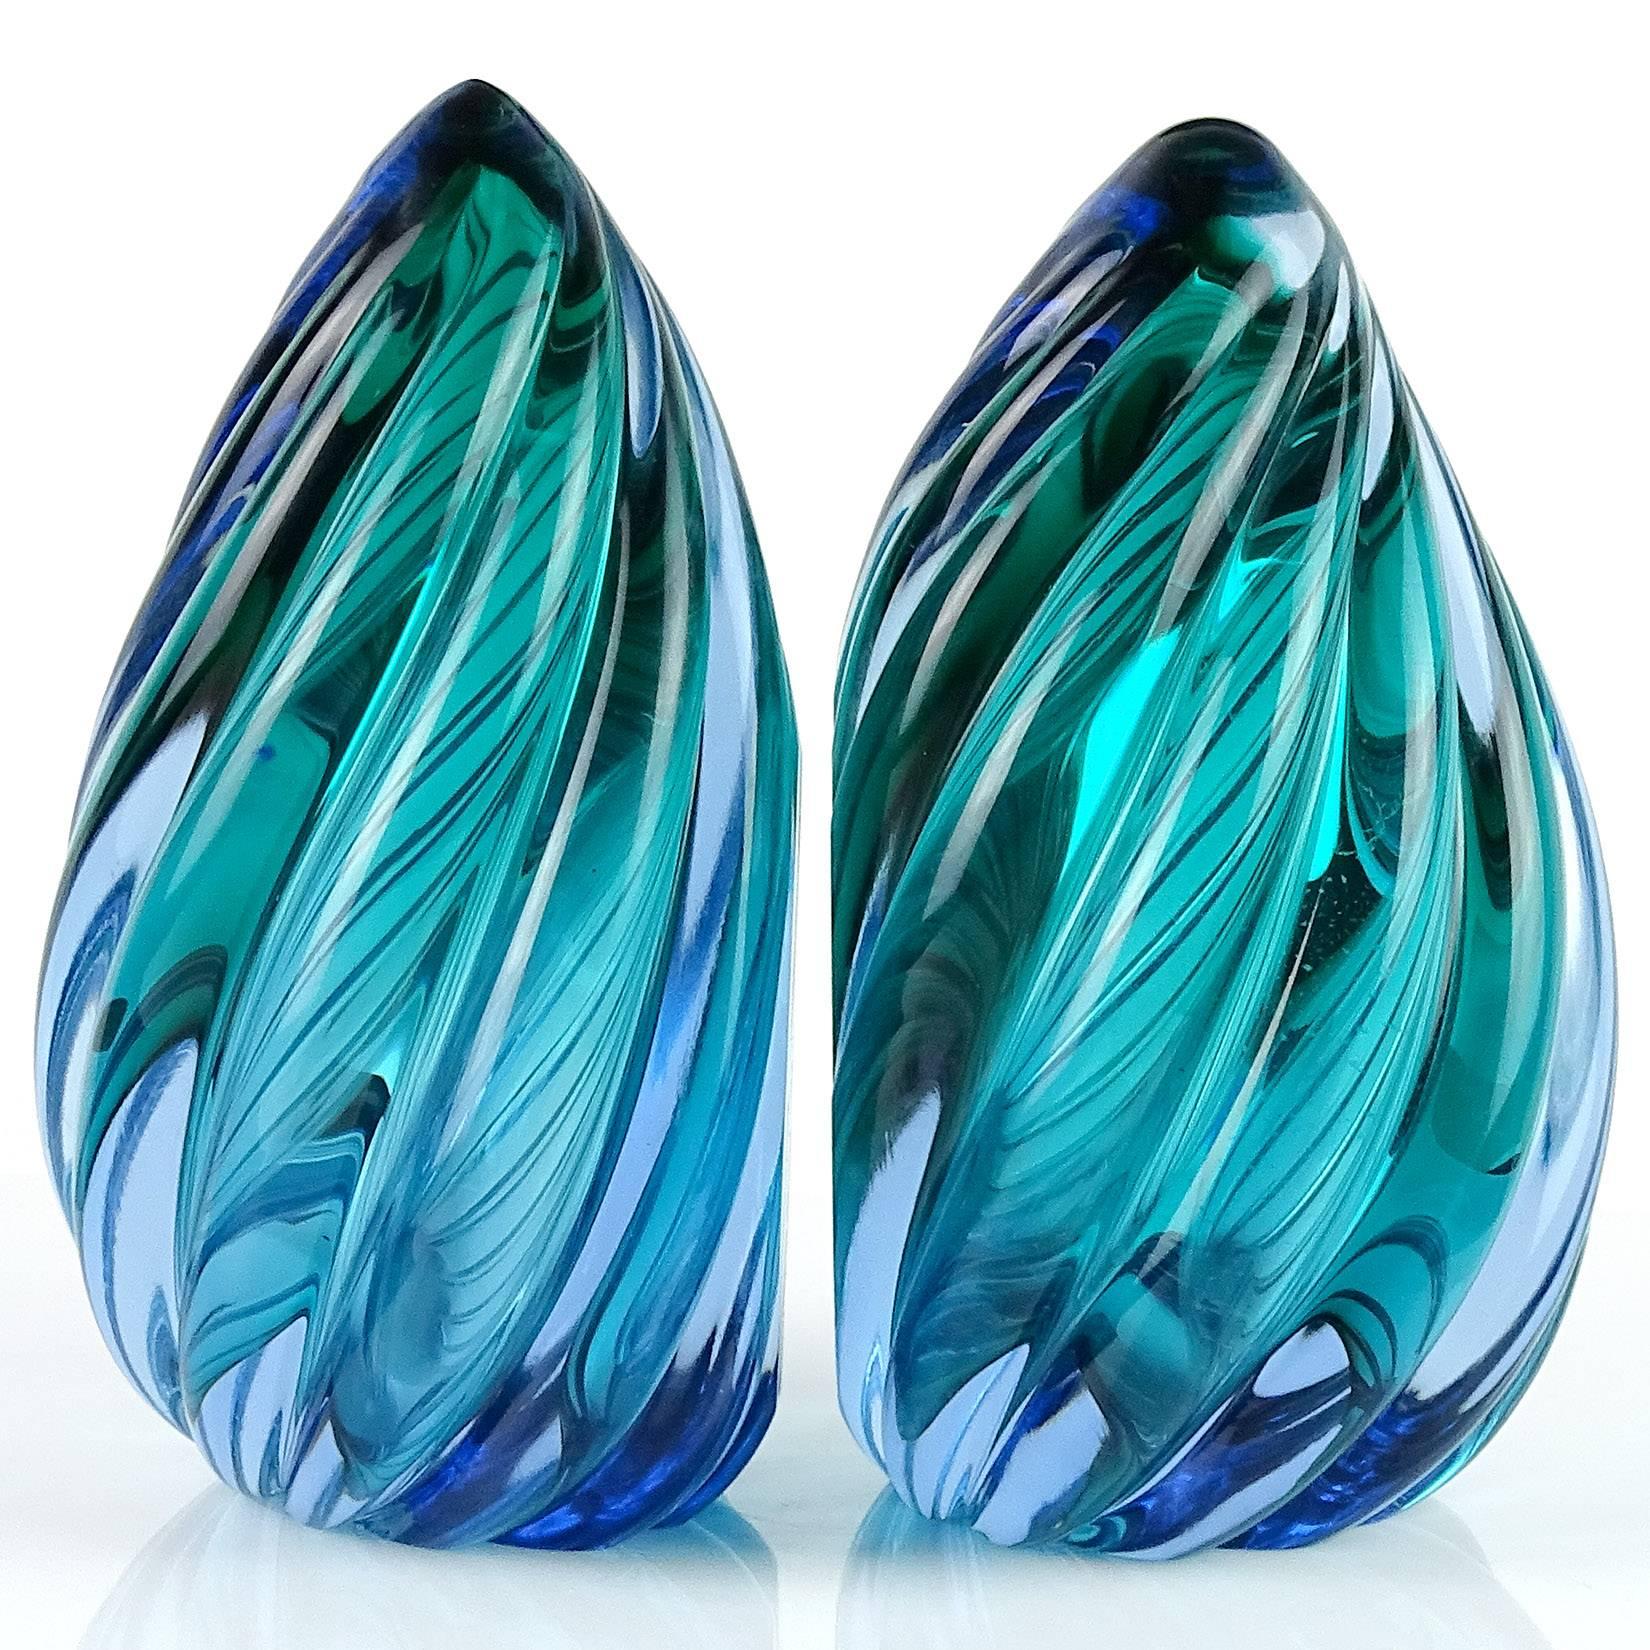 Beautiful Murano handblown Sommerso blue and aqua Italian art glass twisting flame bookends. Documented to designer Alfredo Barbini, circa 1950-1960, and published in his catalog. Gorgeous color and great for any desk or bookshelf.